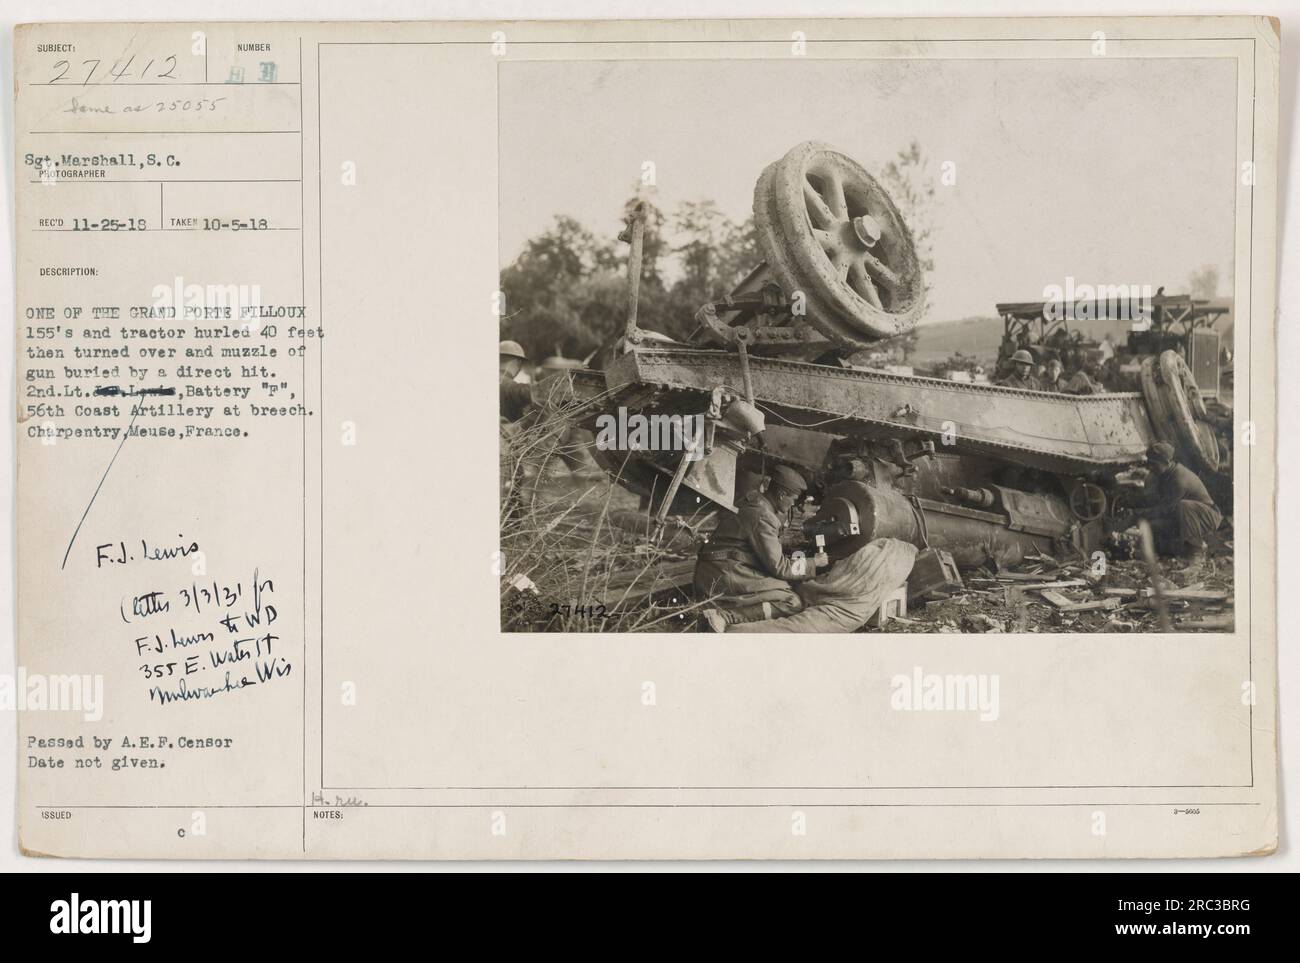 50-word Caption: 2nd Lt., Battery 'p', 56th Coast Artillery, supervising as a direct hit buries the muzzle of the Grand Porte Filloux 155's gun under wreckage. The tractor and cannon are thrown 40 feet before tipping over. Photograph taken in Charpentry, Meuse, France, during World War One. Officially approved by A.E.F Censor. Stock Photo